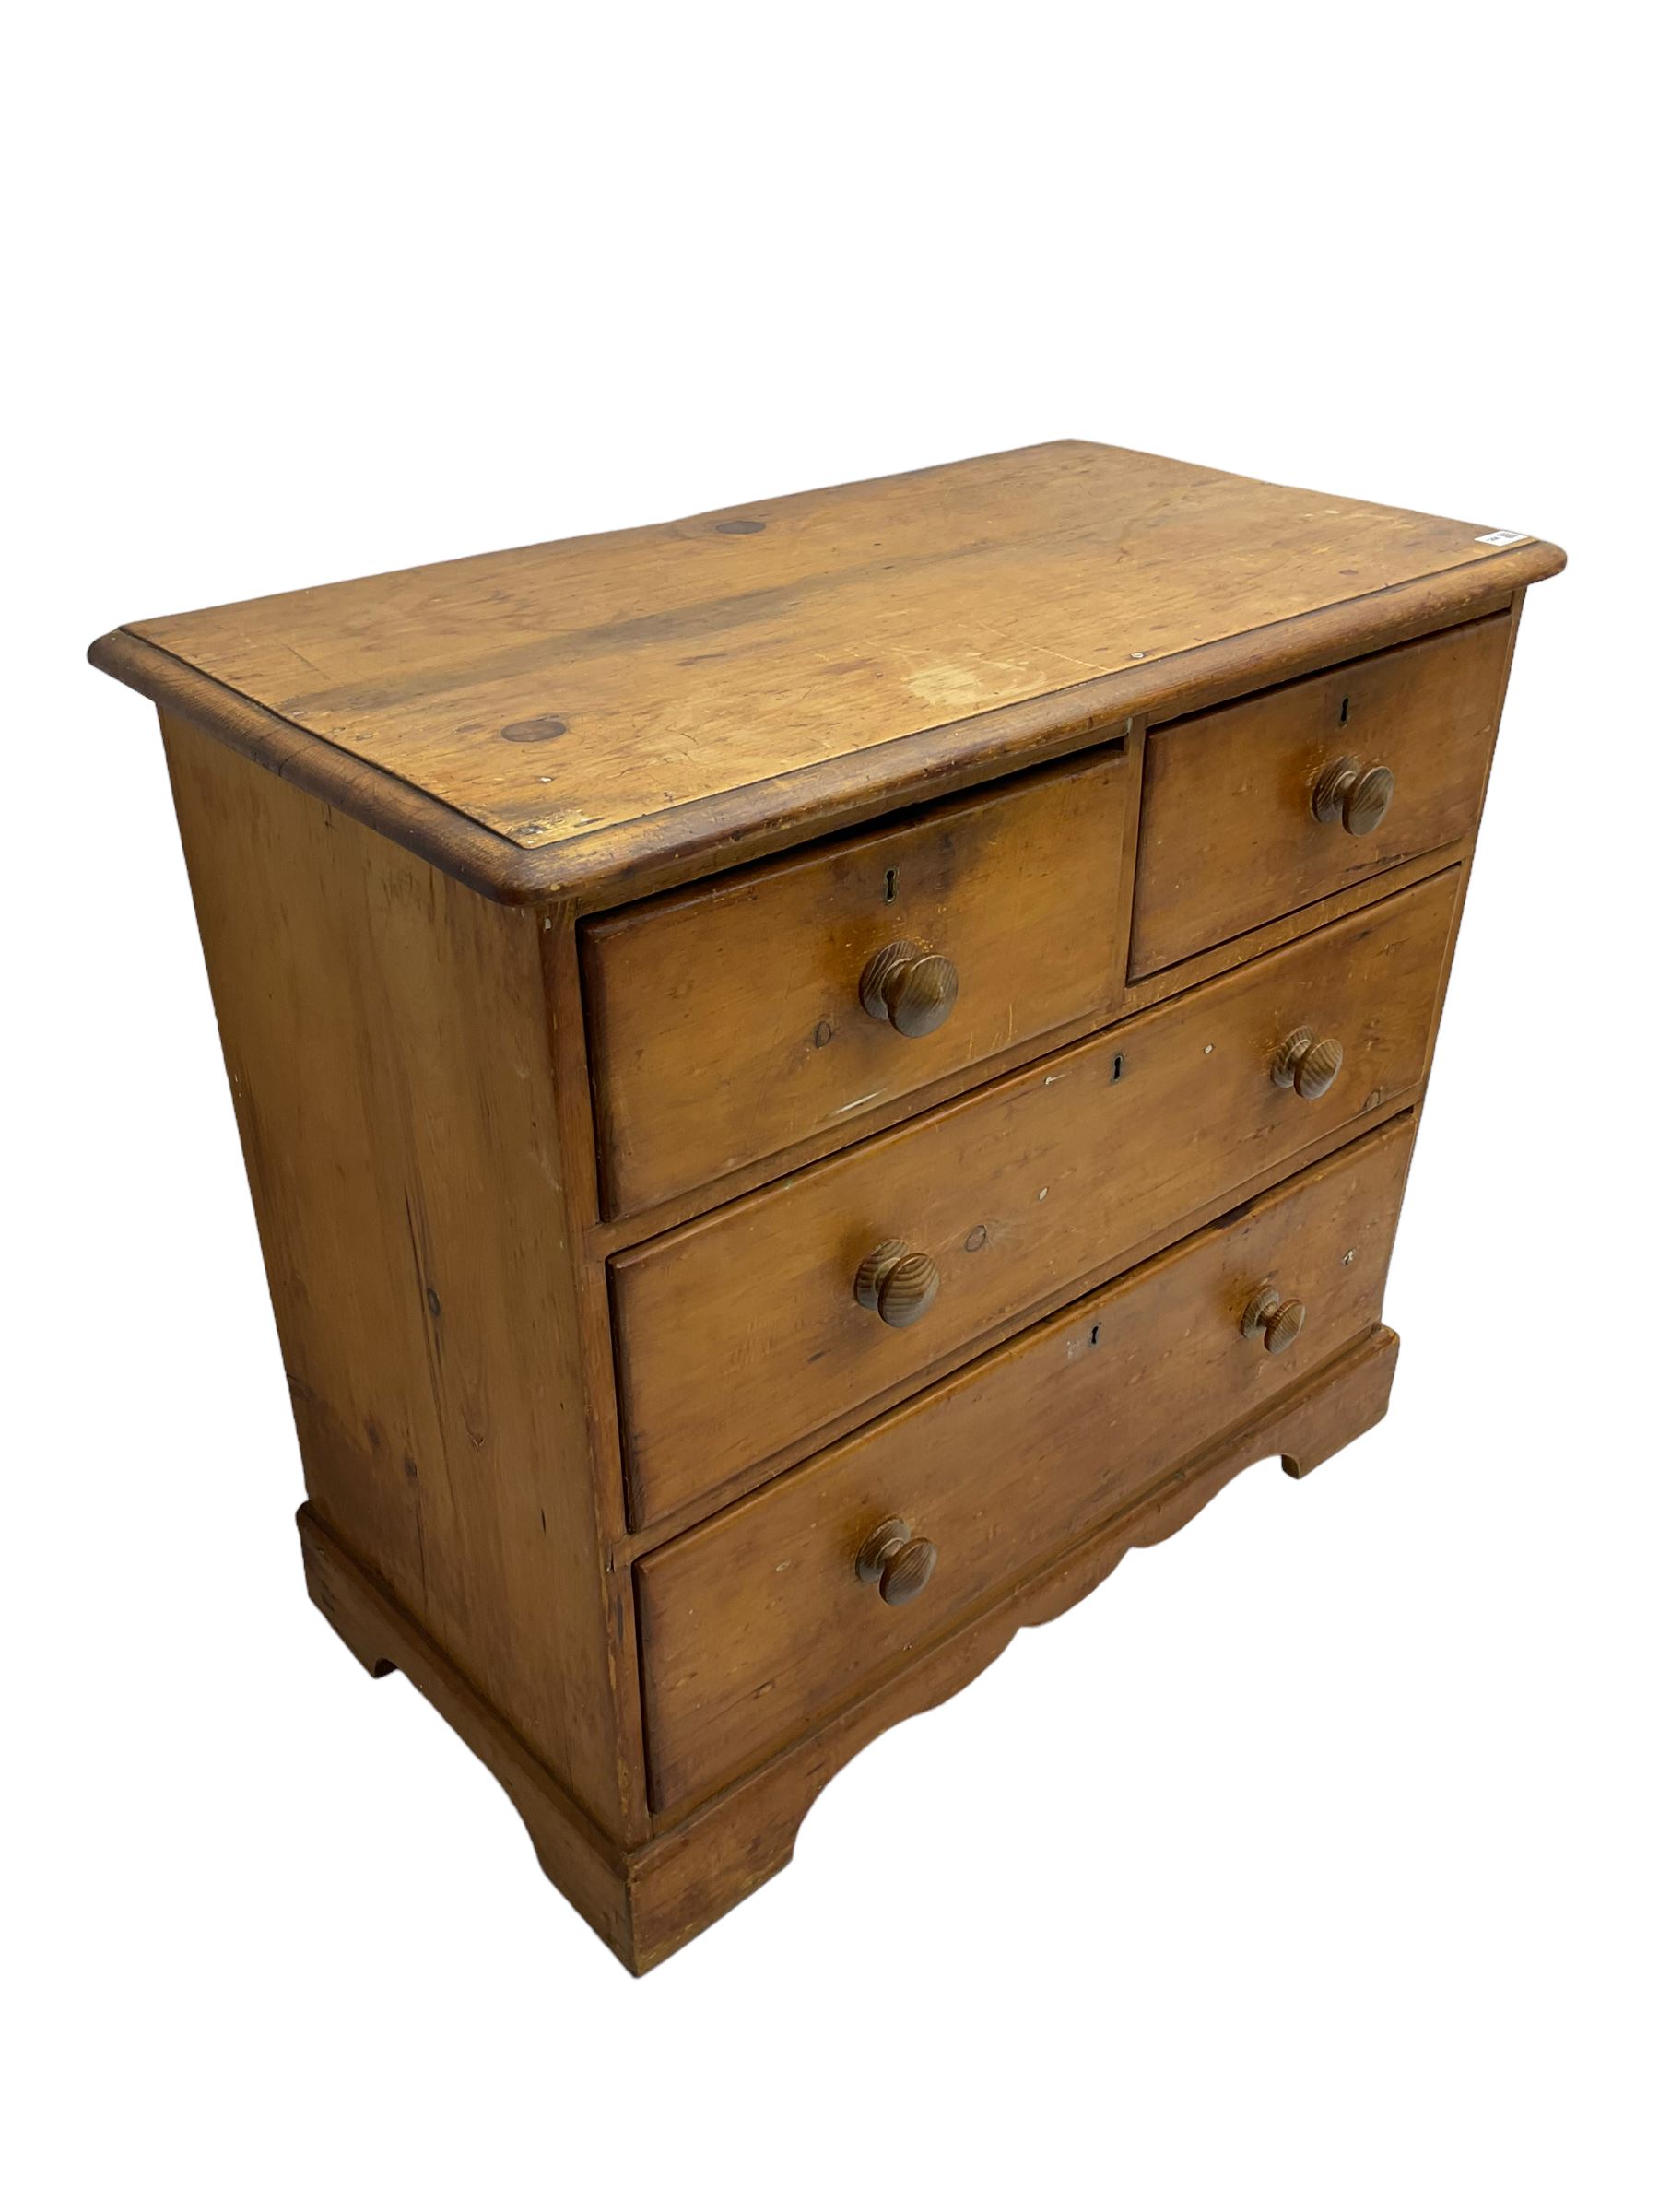 Late 19th century waxed pine chest - Image 5 of 8